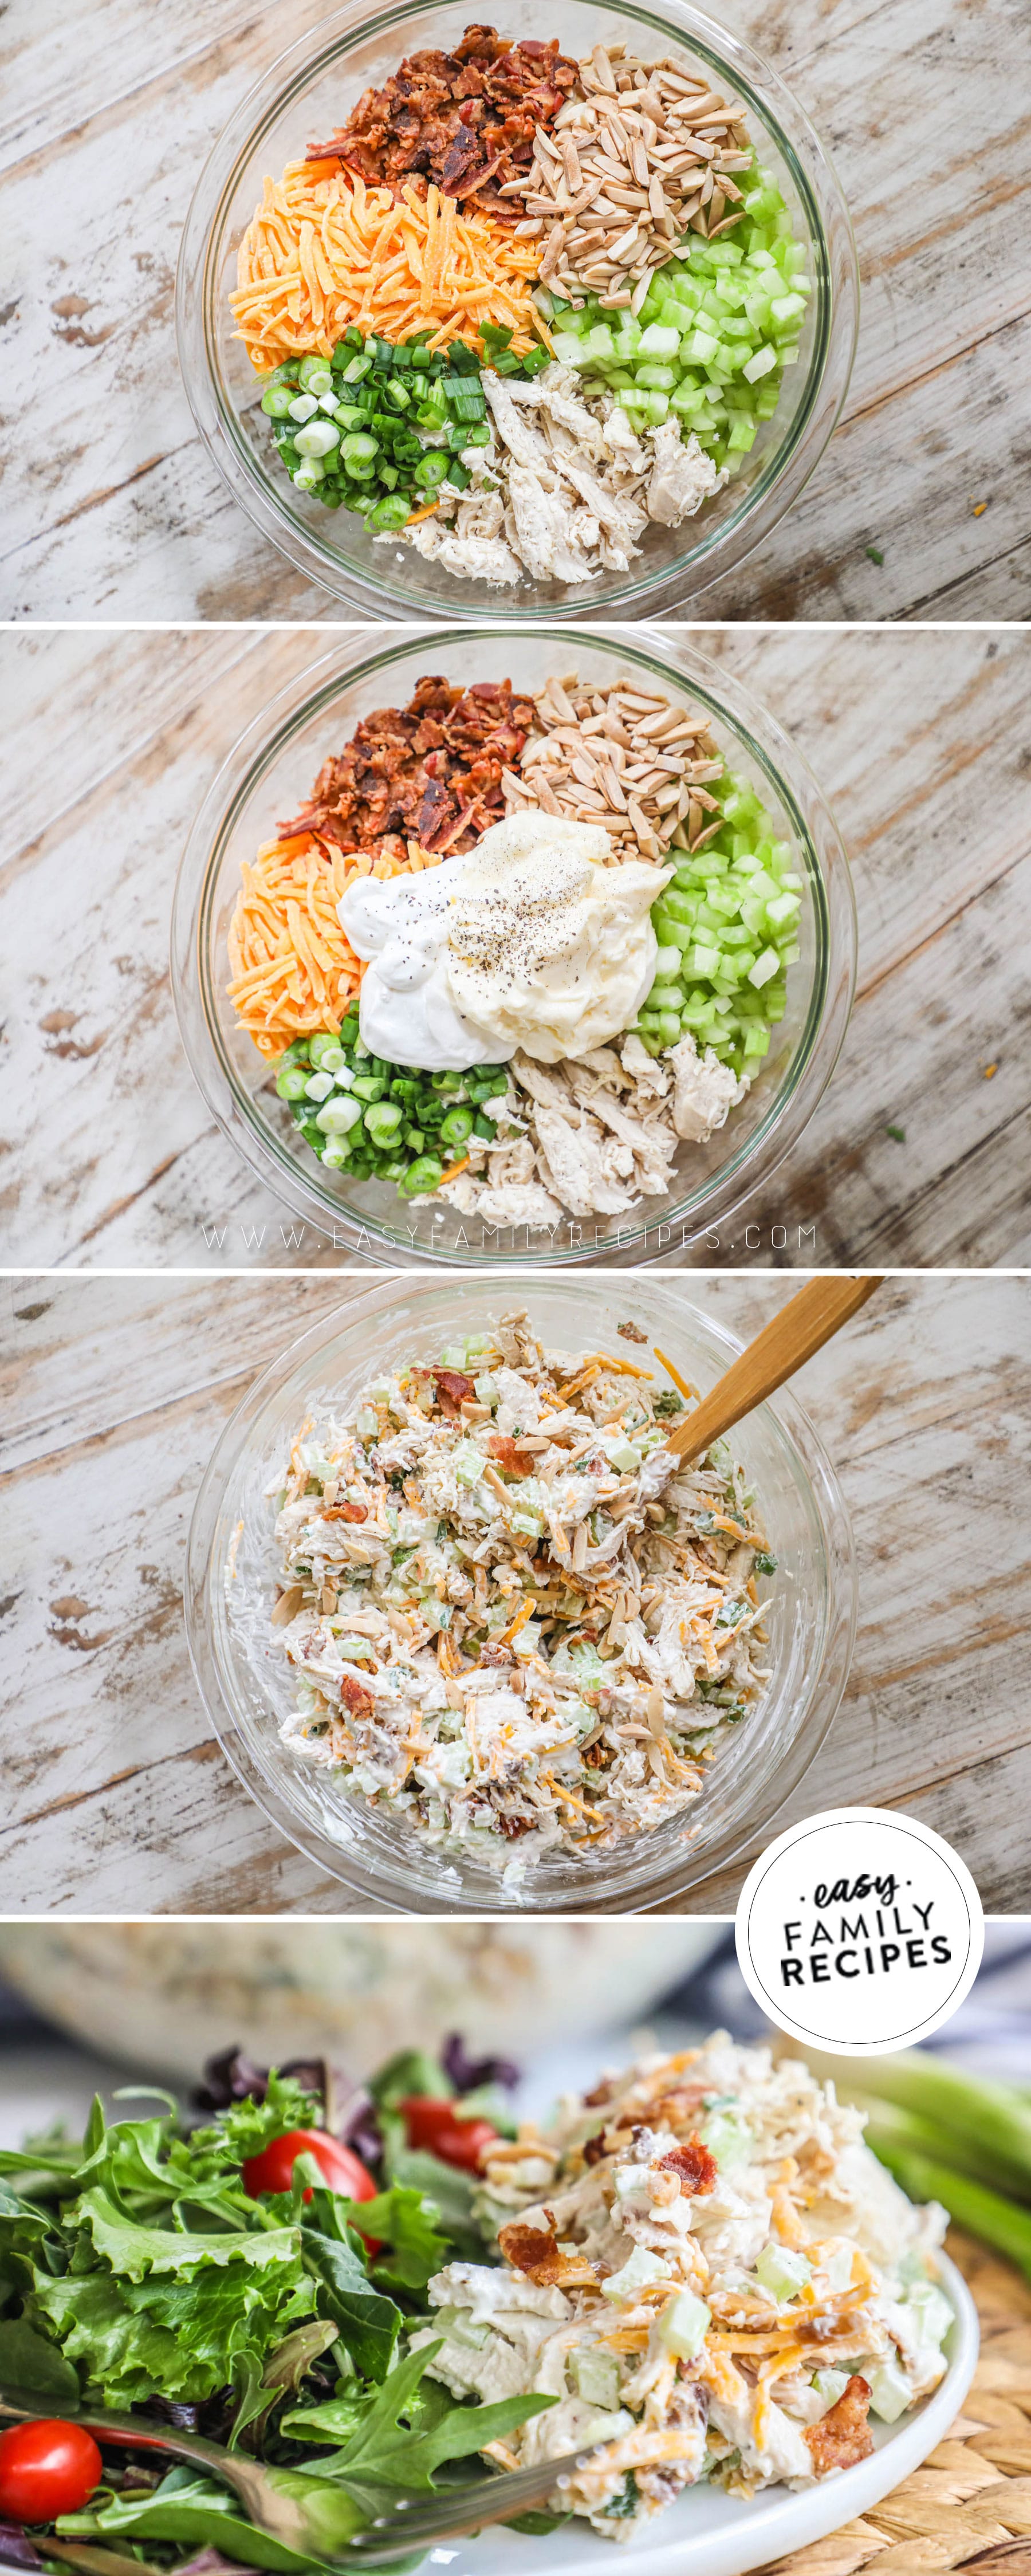 Step by step photos to make chicken salad. step 1 add everything to a large bowl step 2 top with sour cream and mayo step 3 mix well to coat everything step 4 enjoy!